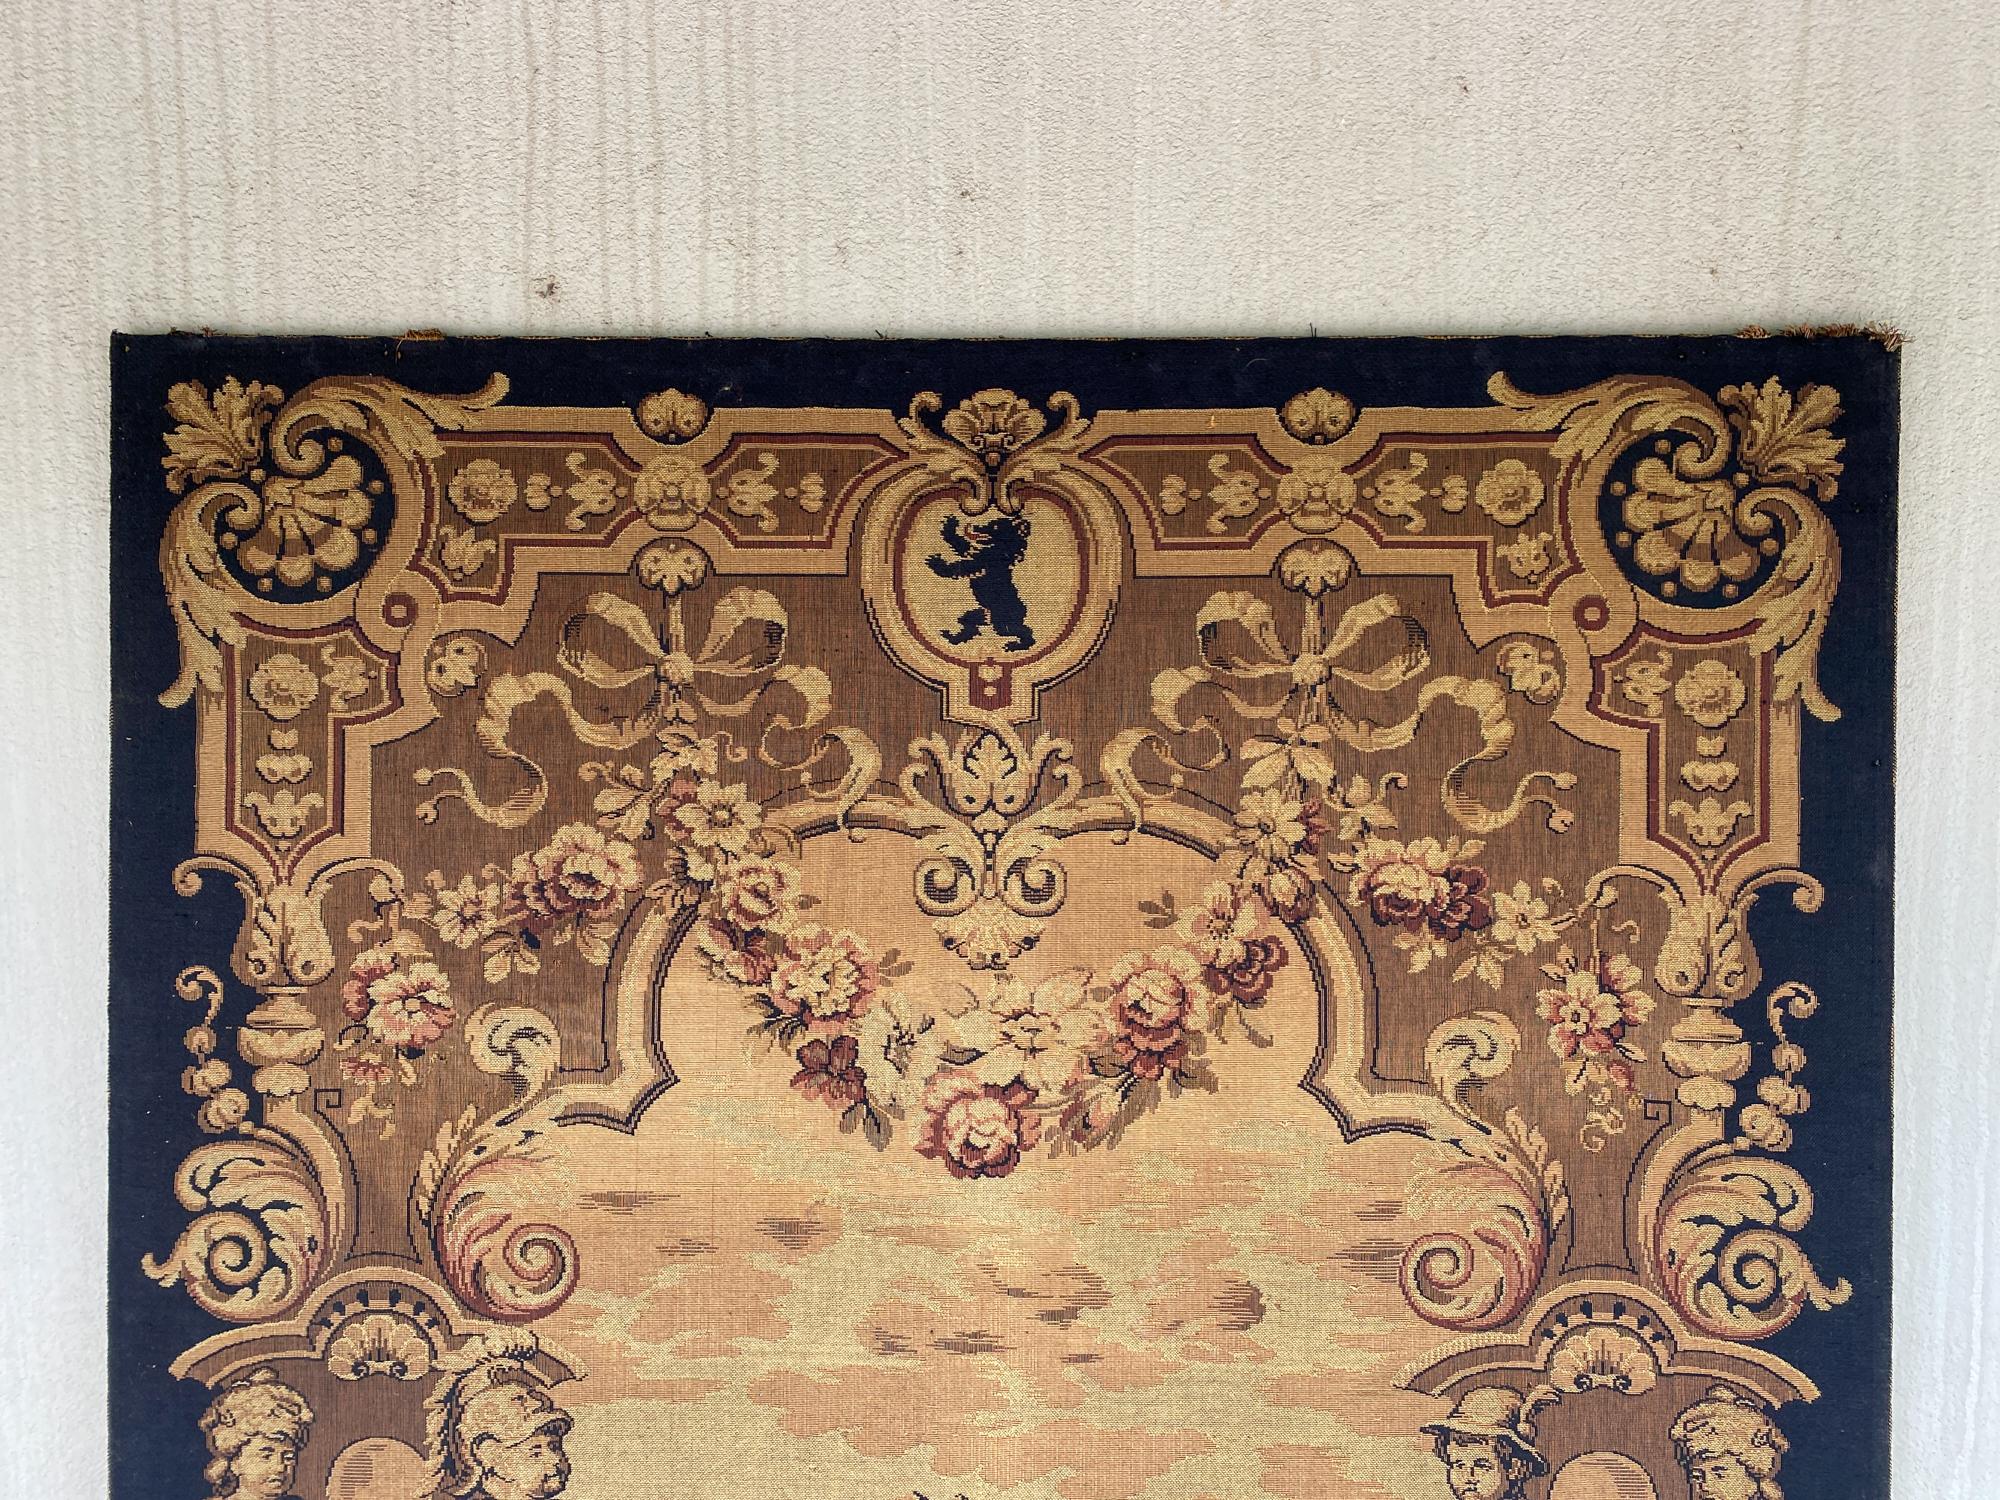 This is a 19th century machine woven tapestry in gold, black and burgundy threads featuring a large castle surrounded by figures and decorative imagery. The bottom edge has a name and manufacturer information and indicates it was made in Berlin. The